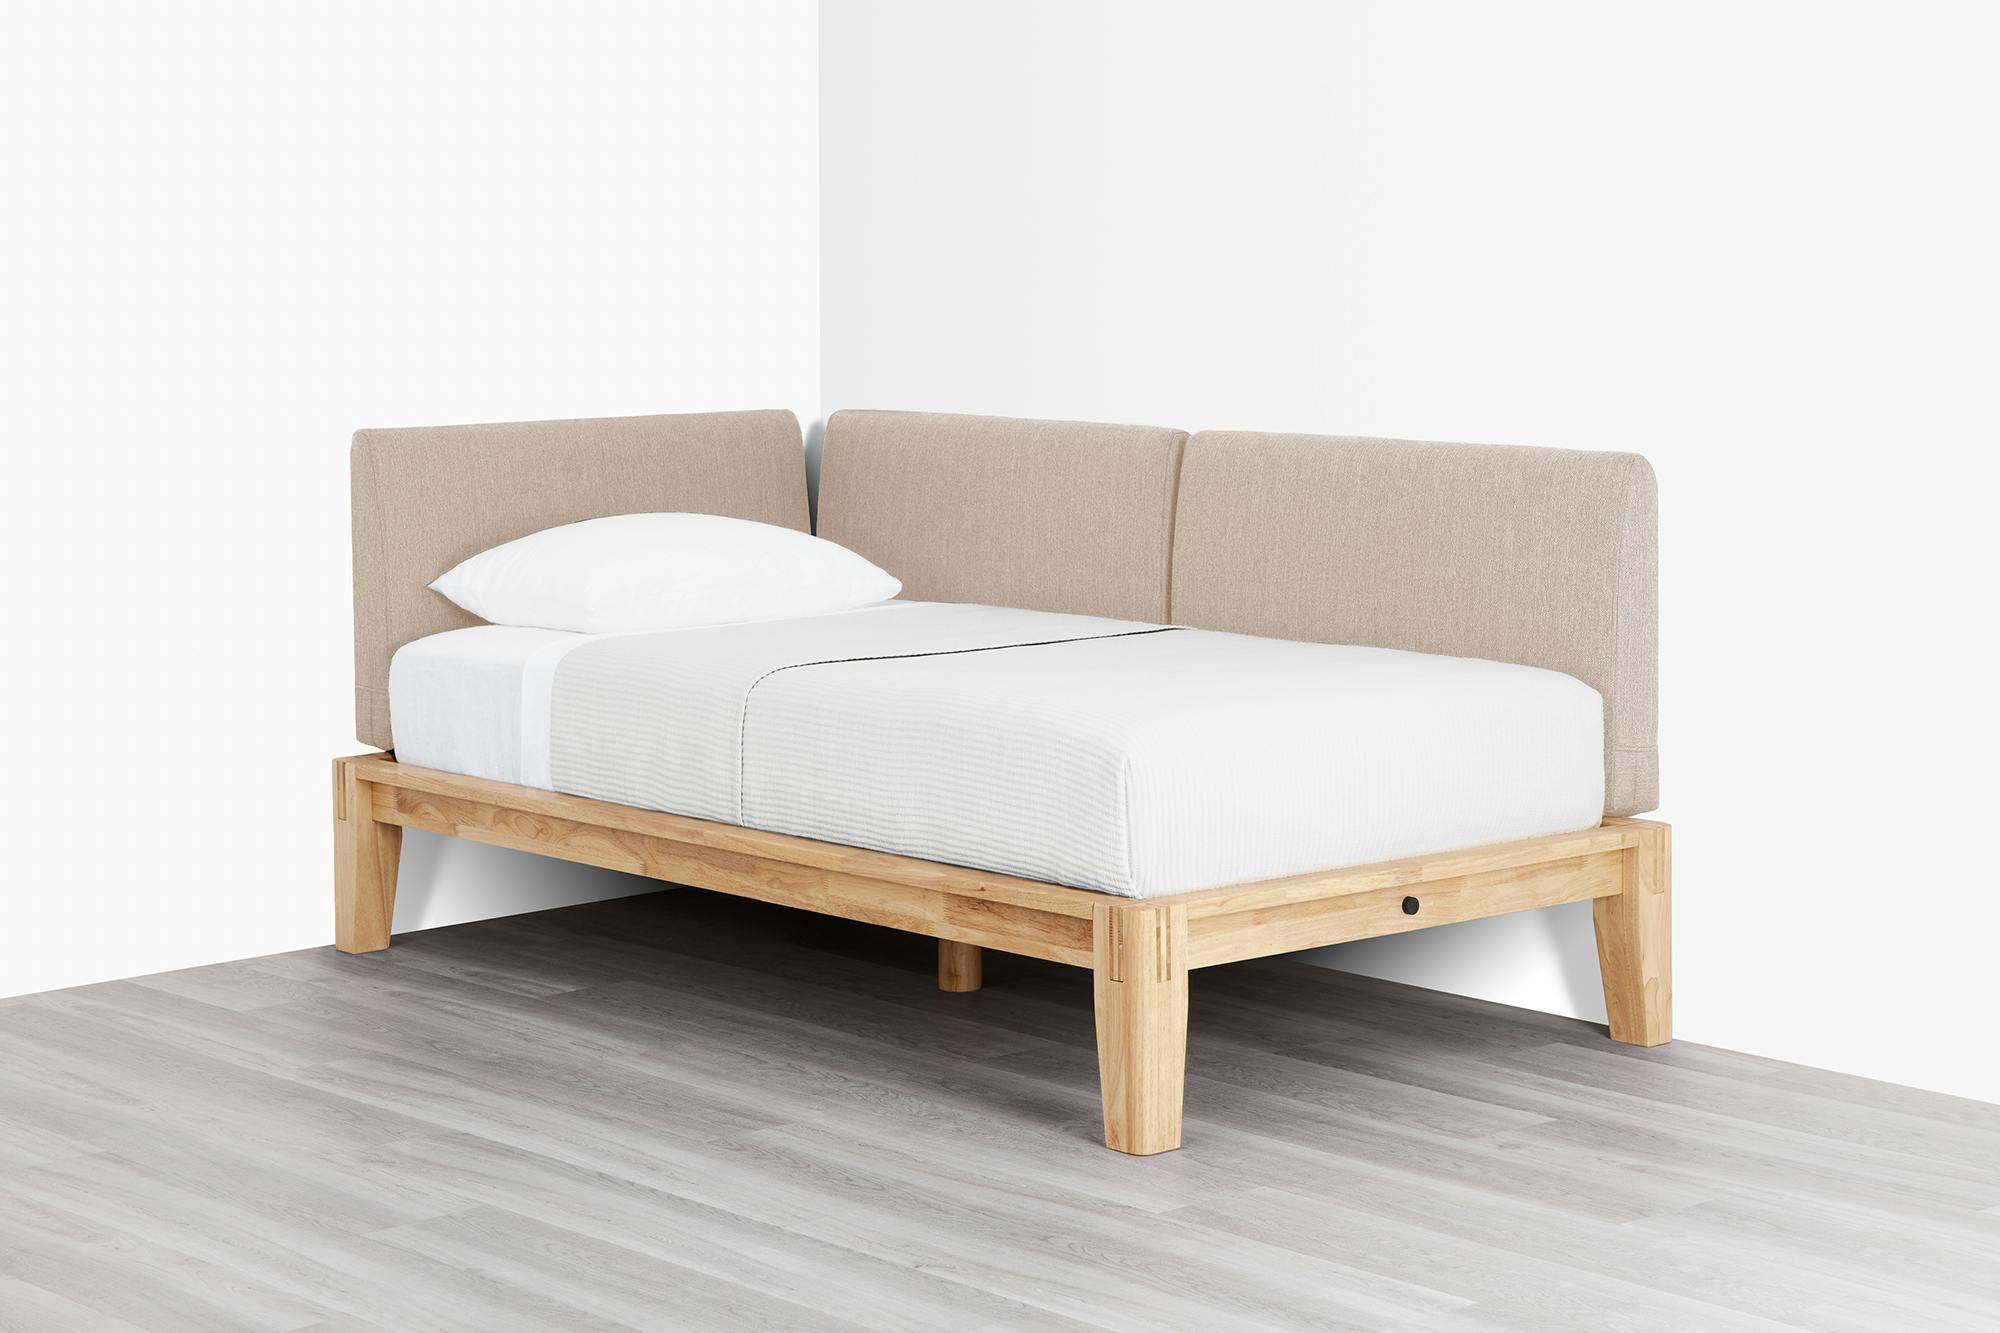 PDP Image: The Daybed (Natural / Dune) - 3:2 - Front